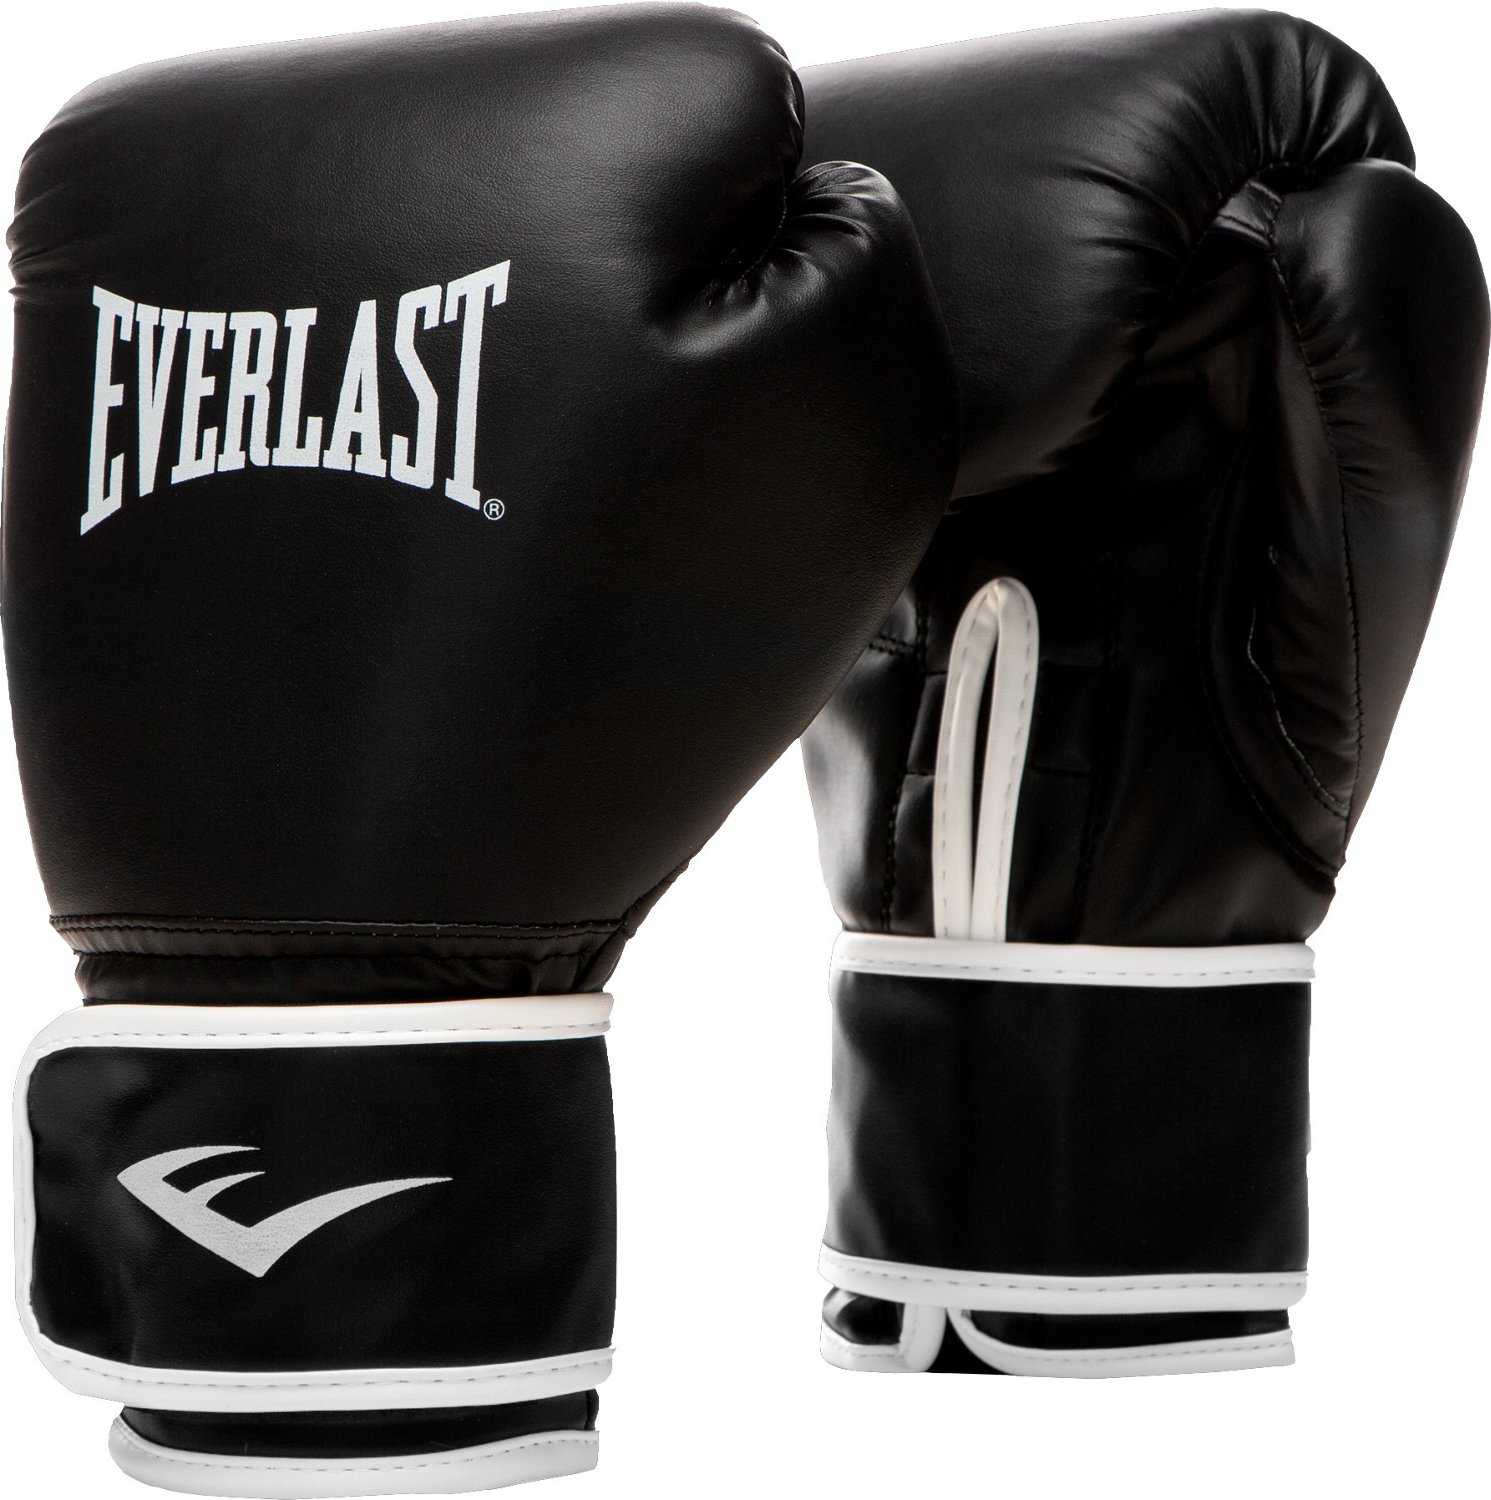 Everlast Core2 Training Boxing Gloves Free Shipping At Academy